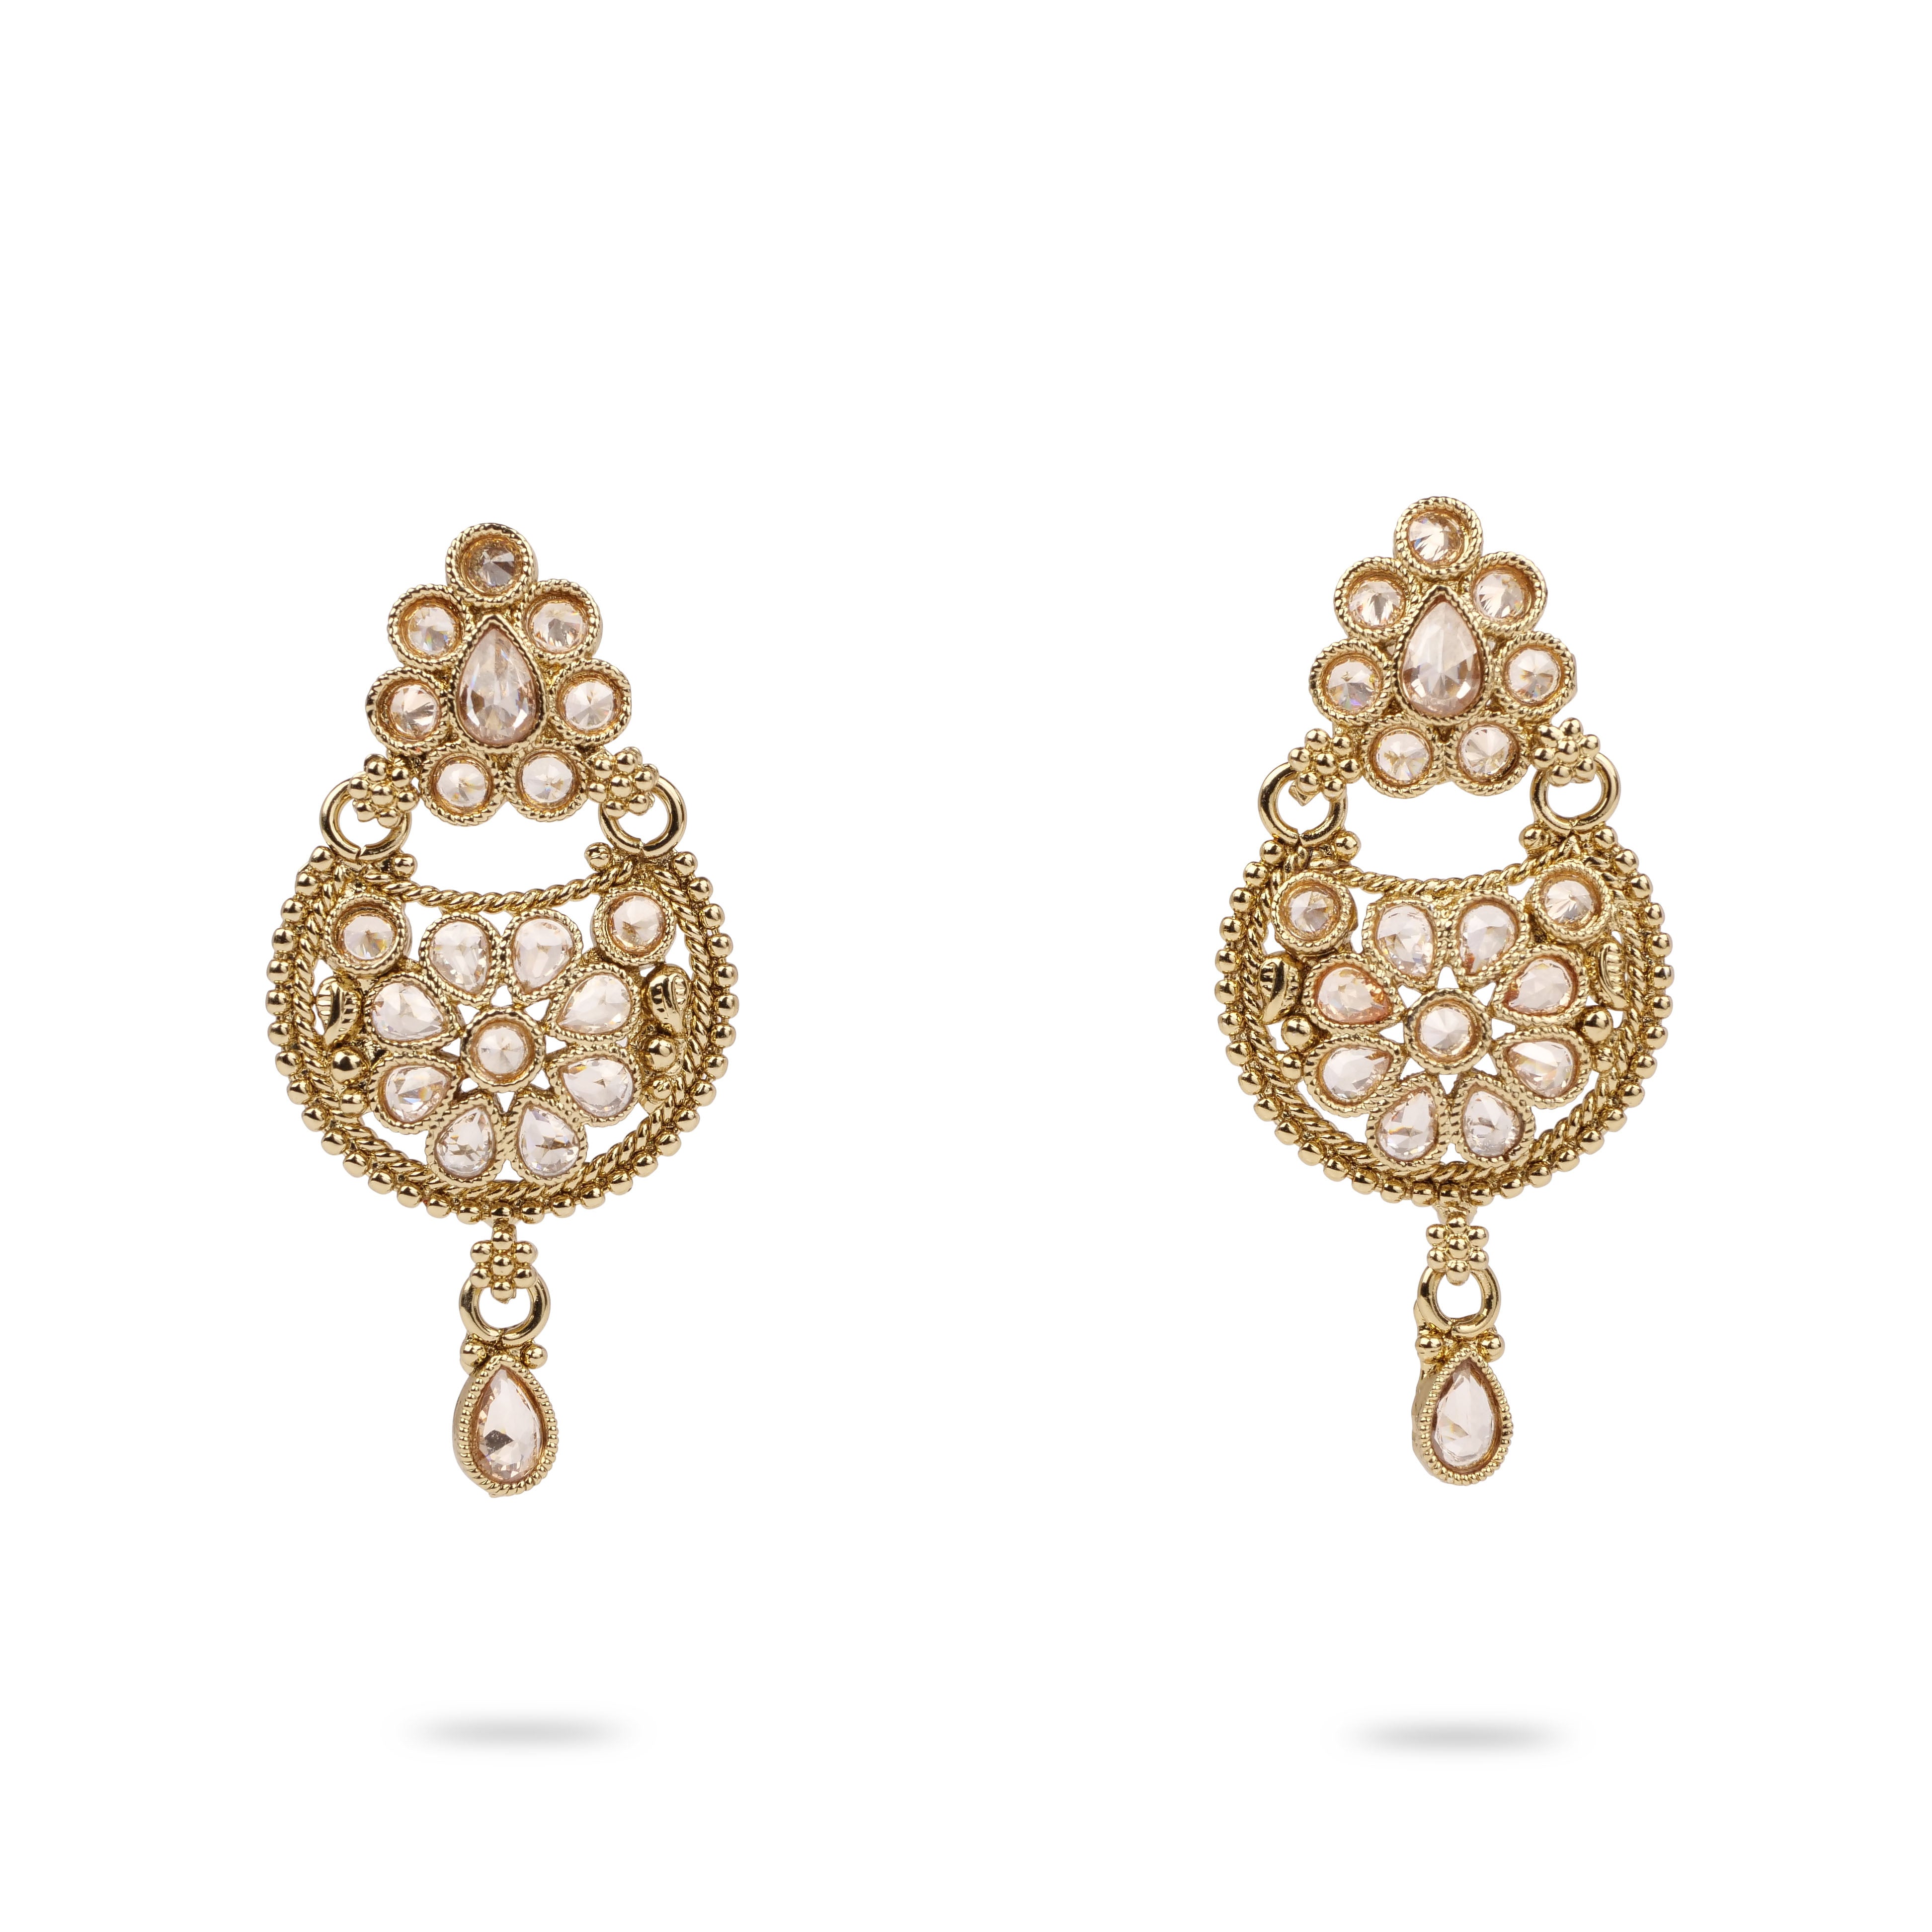 Raniya Antique Earrings with Champagne Crystal